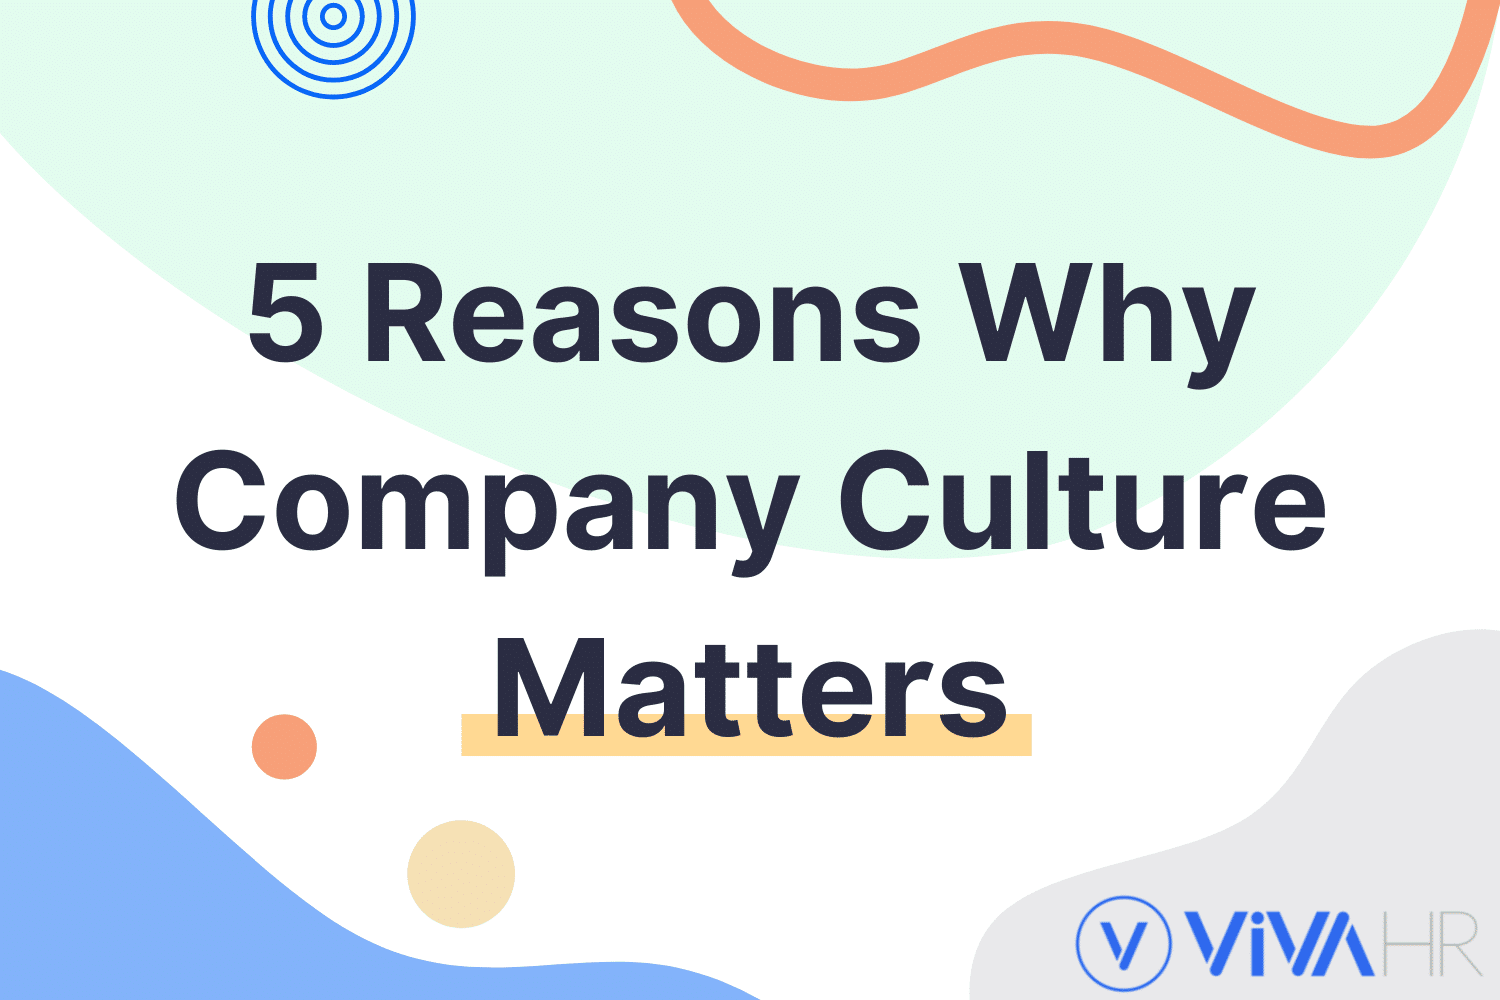 5 Reasons Why Company Culture Matters